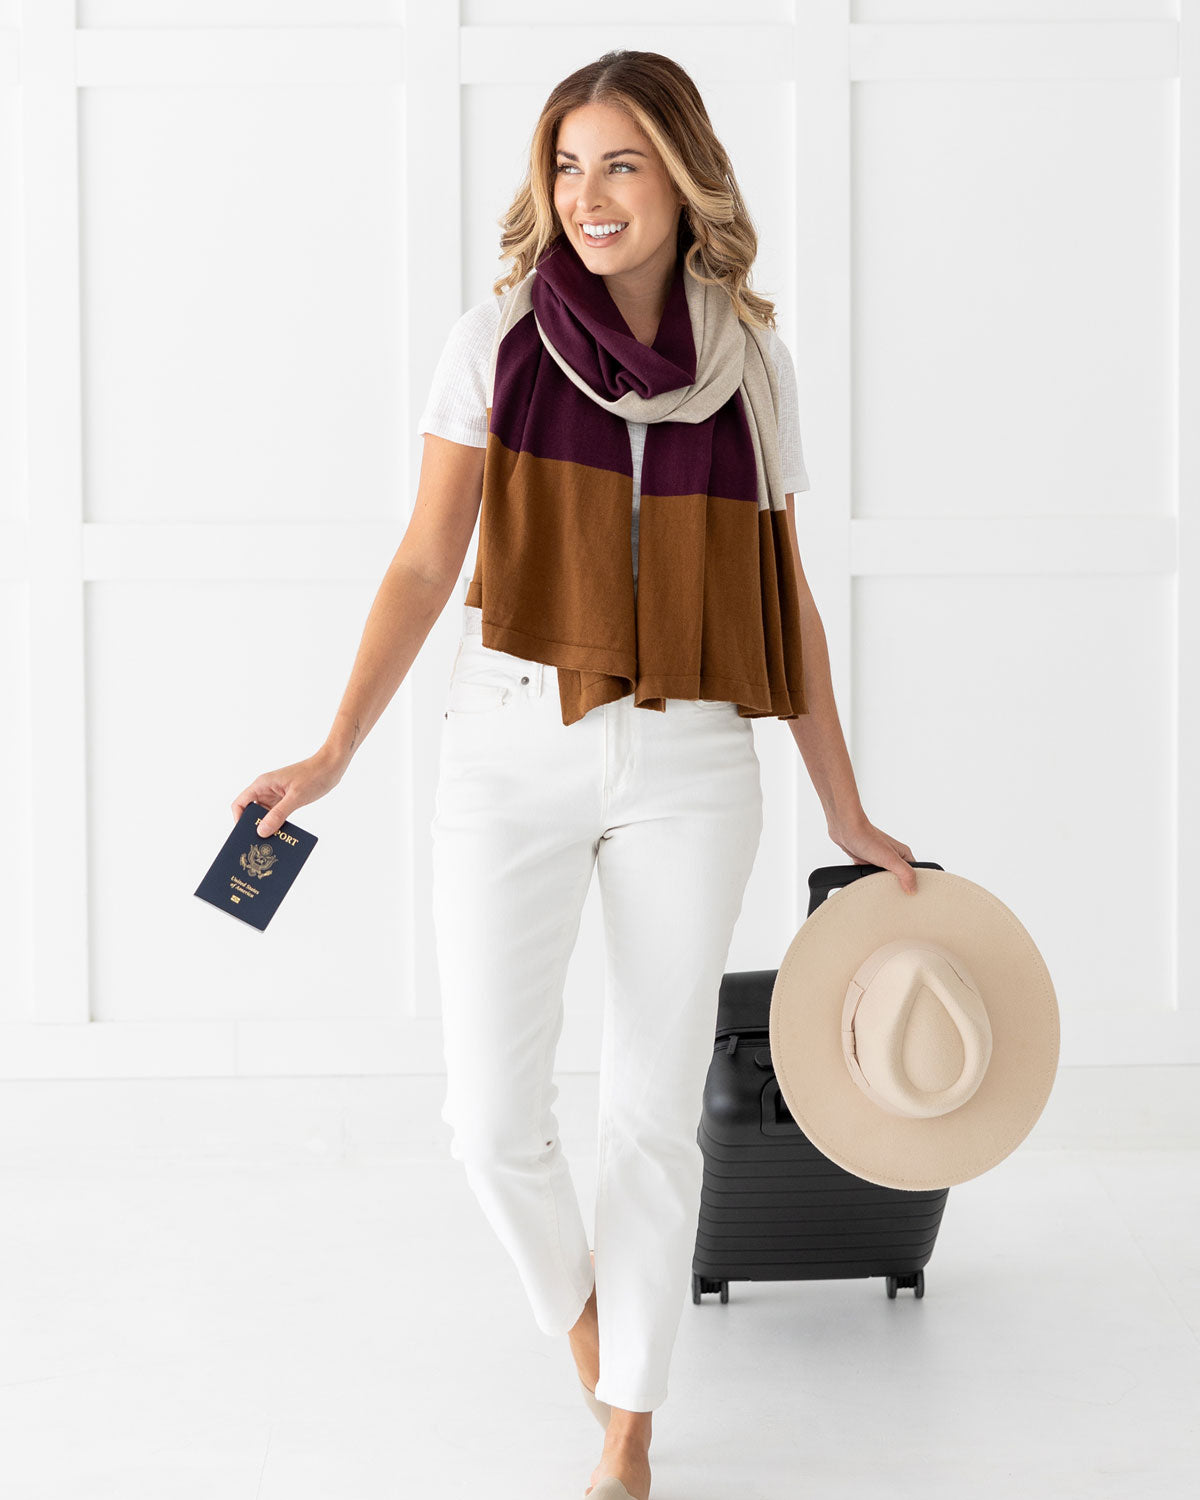 The Dreamsoft Travel Scarf - Mulberry Colorblock